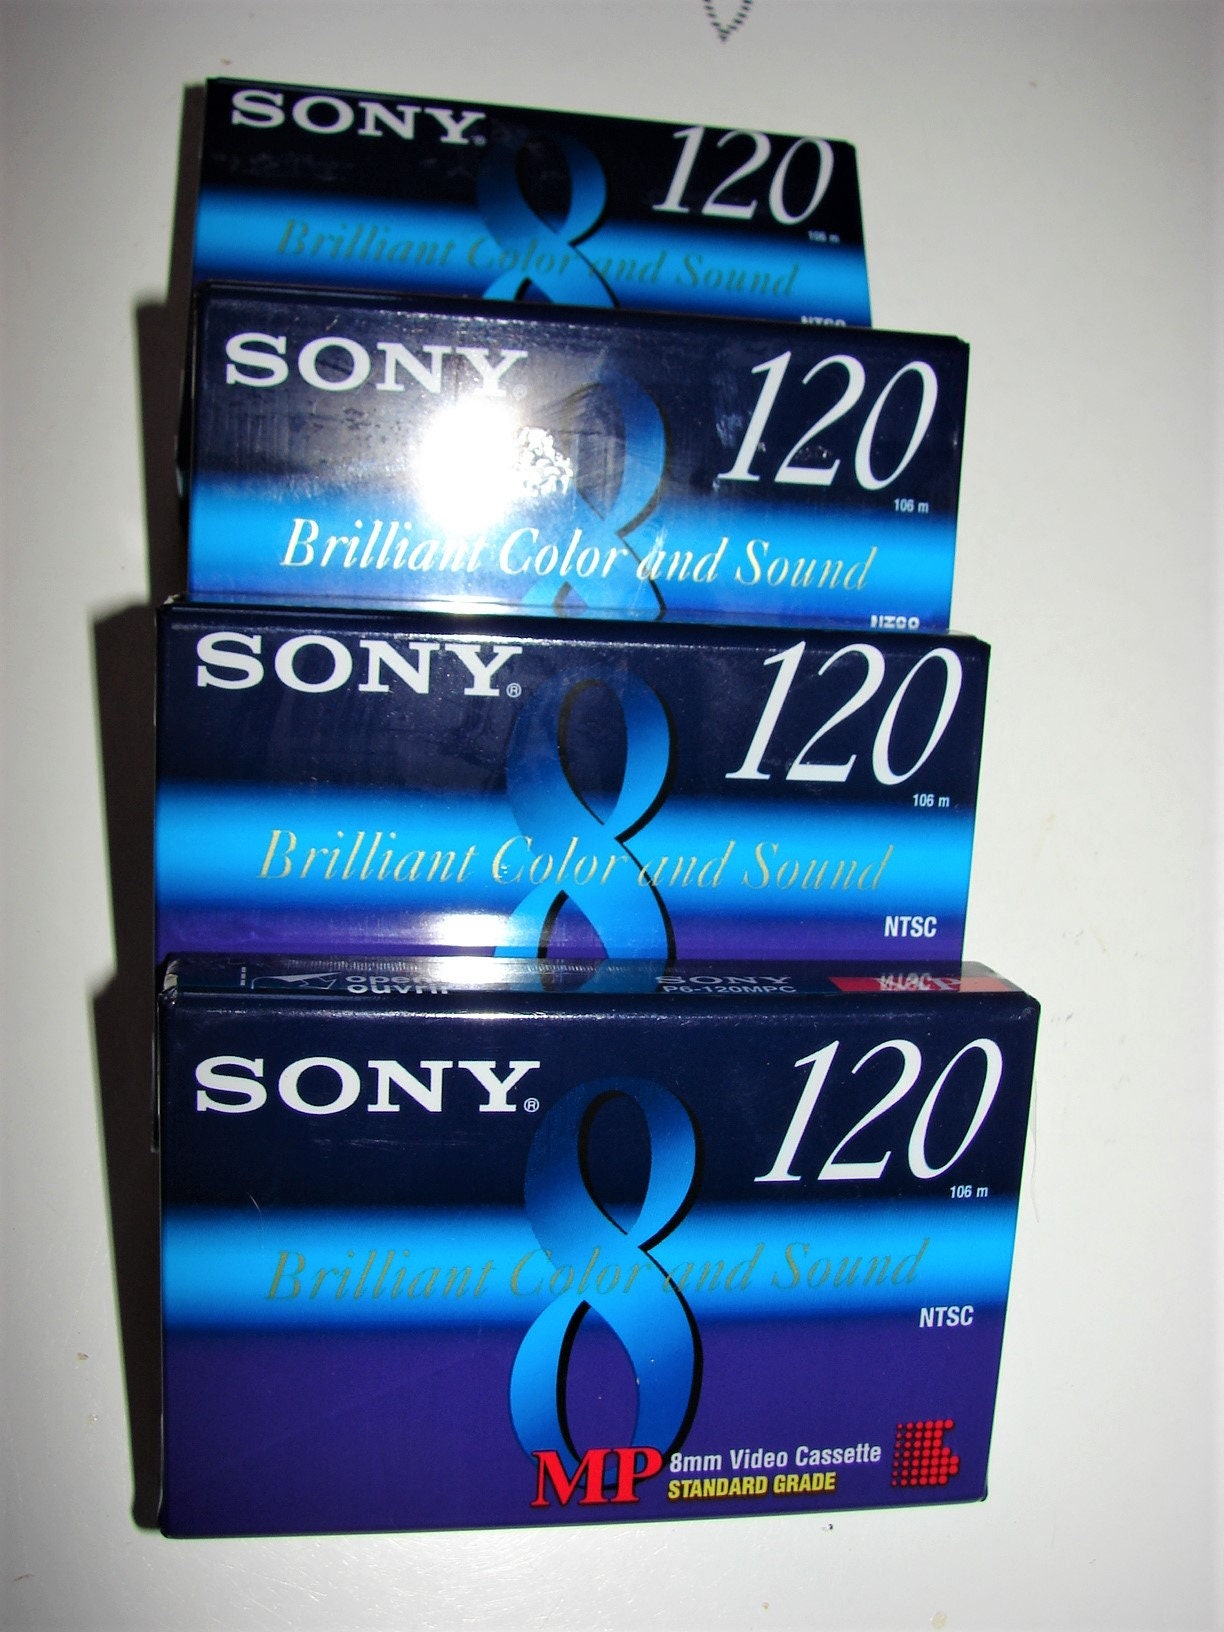 5-pack Sony P6-120MPC Standard Grade 8mm Video Cassettes 